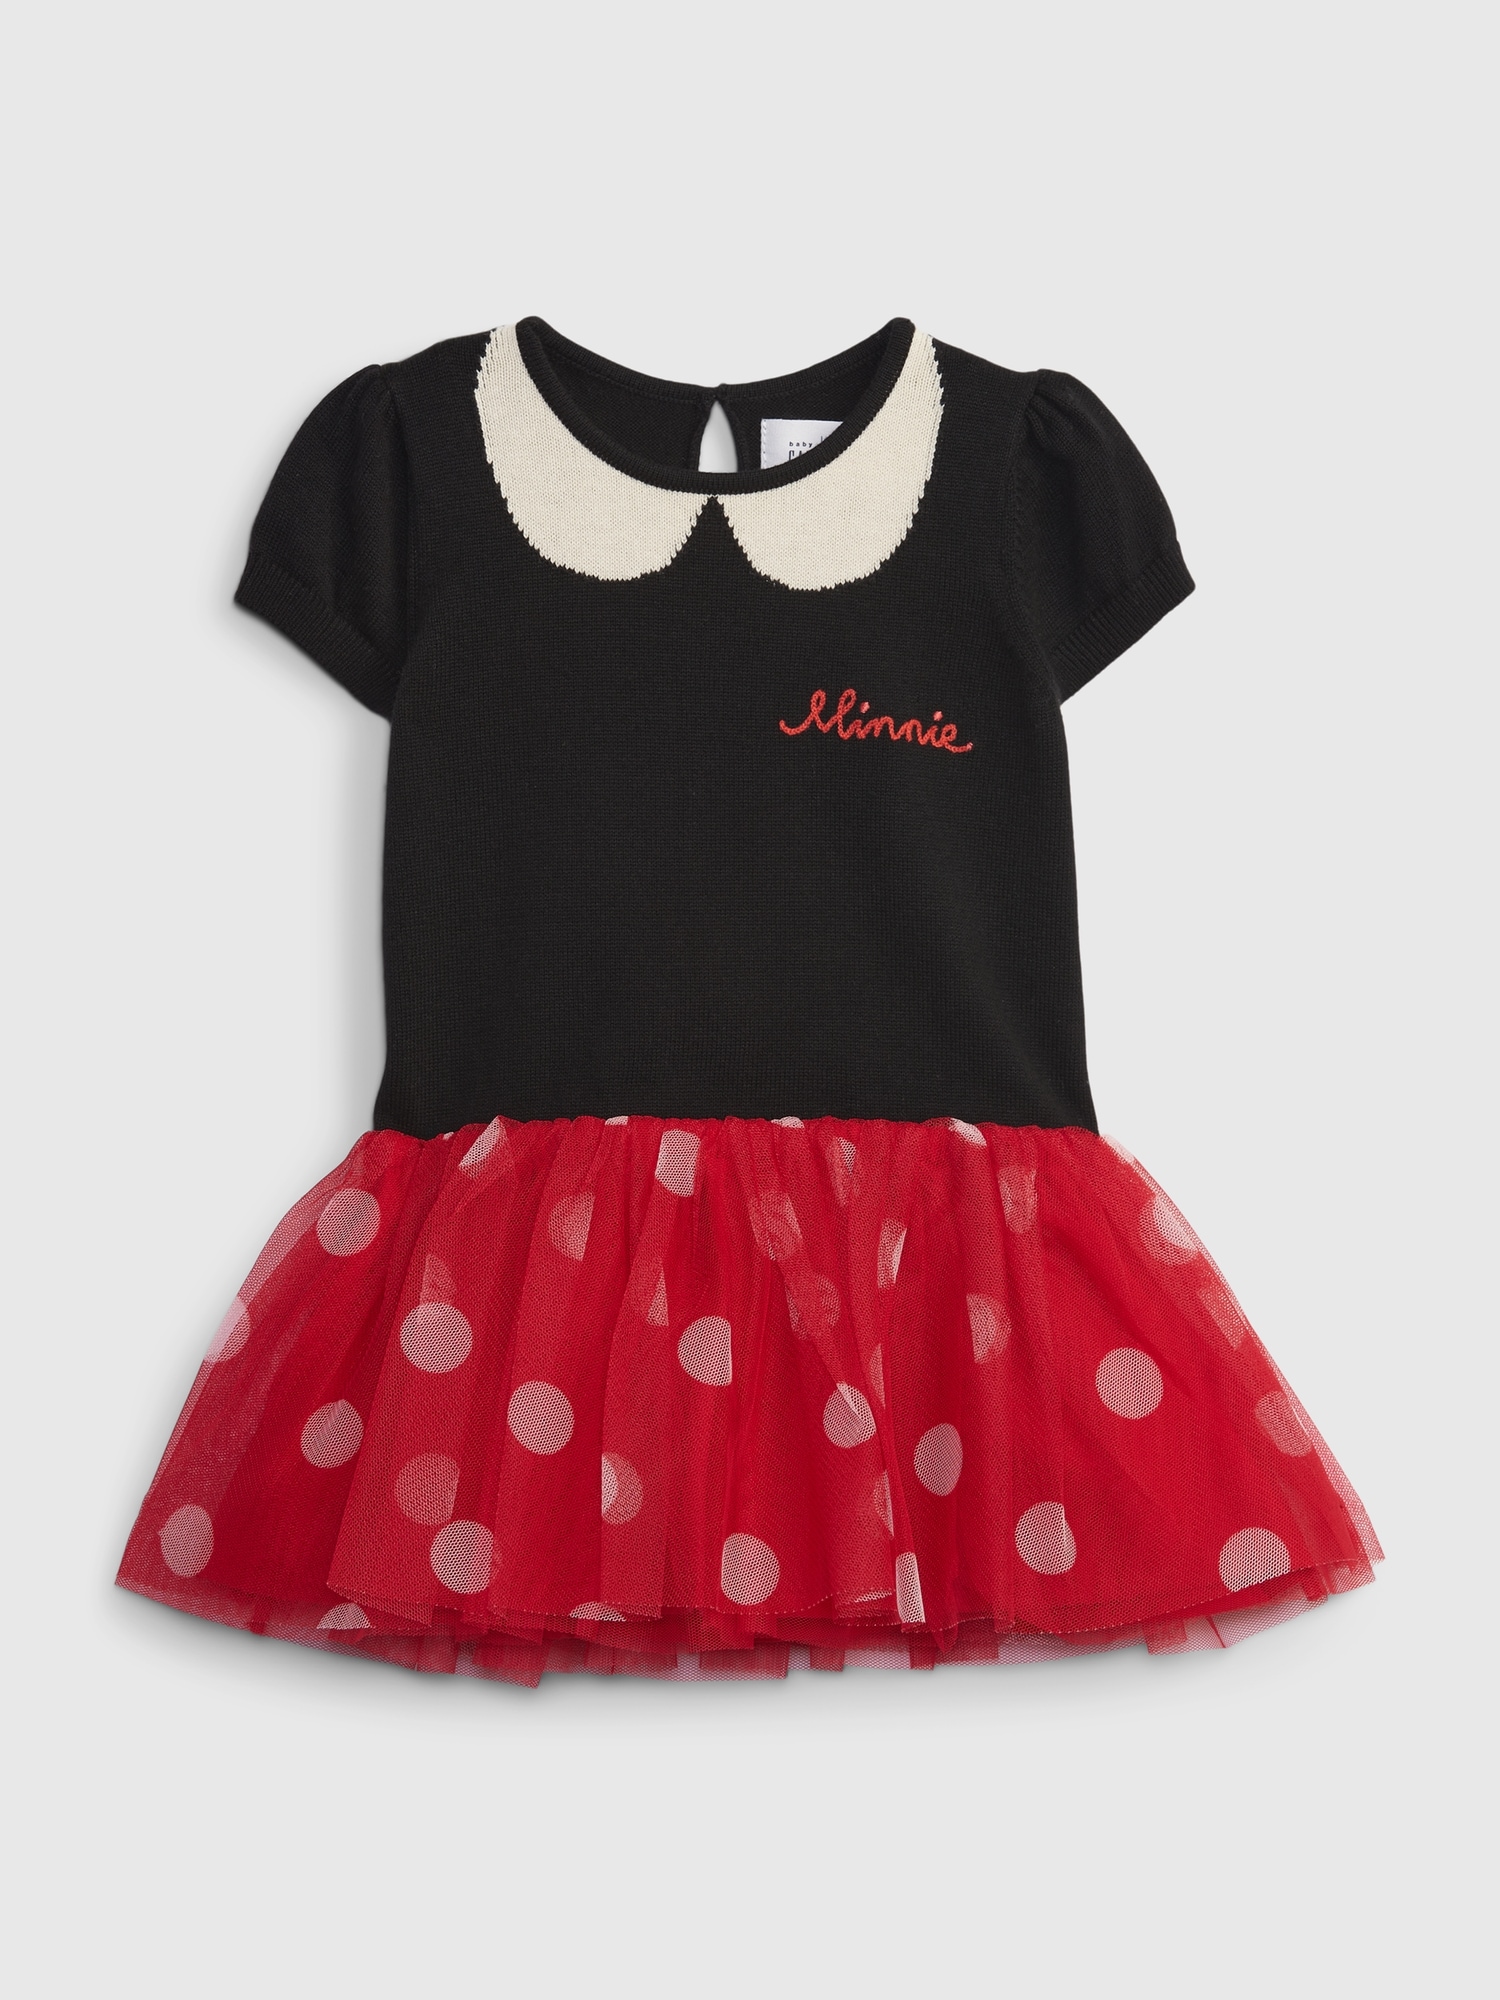 My First Disney Costume - Minnie Mouse Costume - Black/Red/White - 12-18  Months